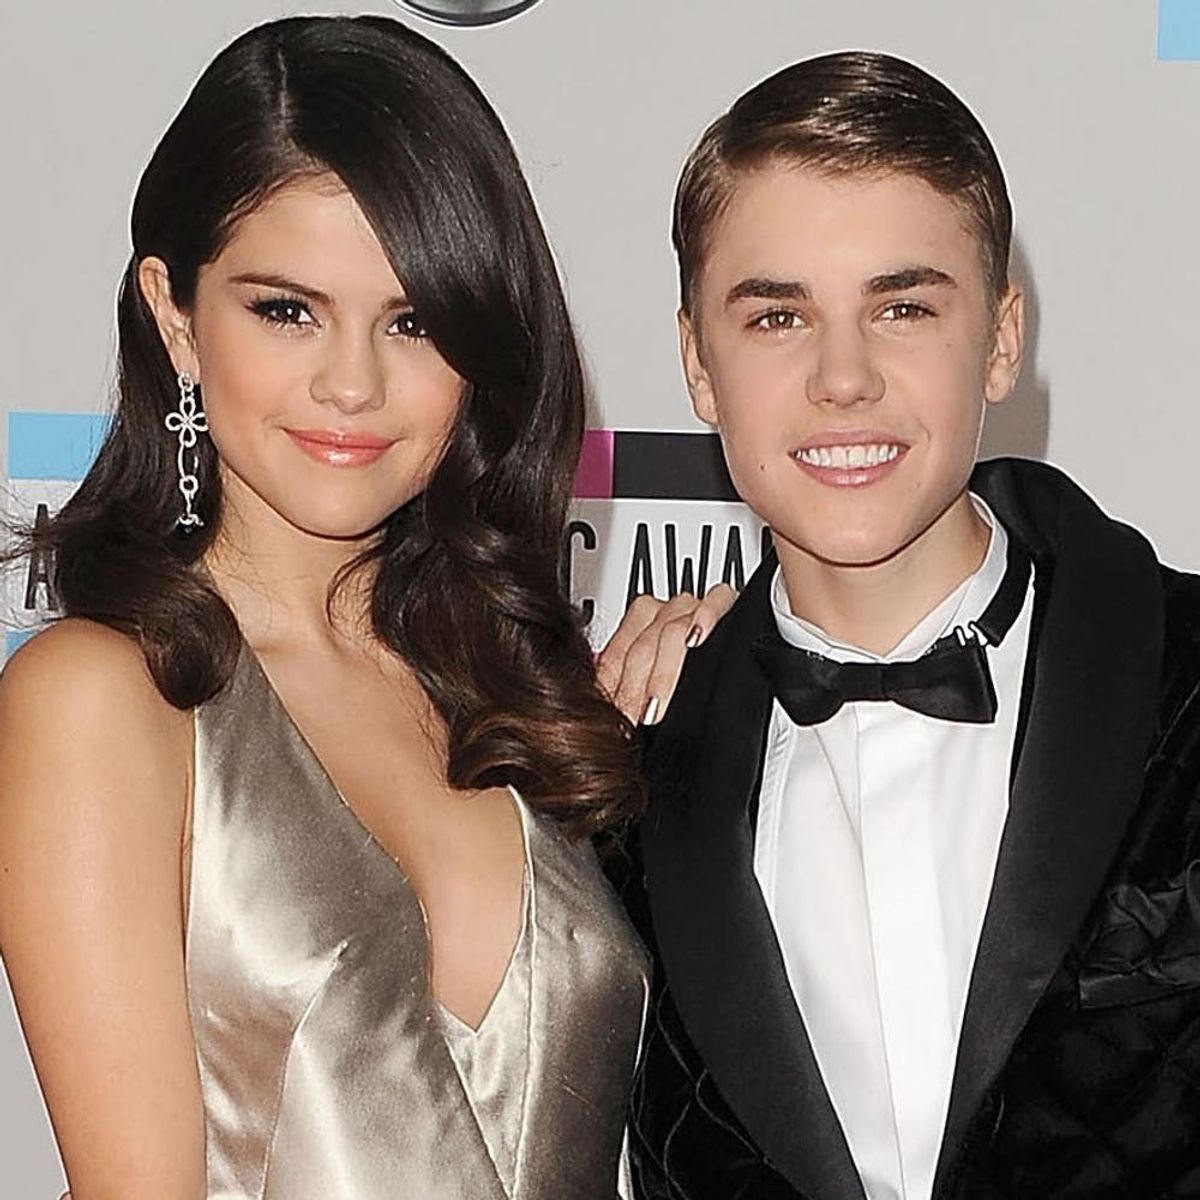 Selena Gomez and Justin Bieber Took a Mini-Holiday Together by Private Jet